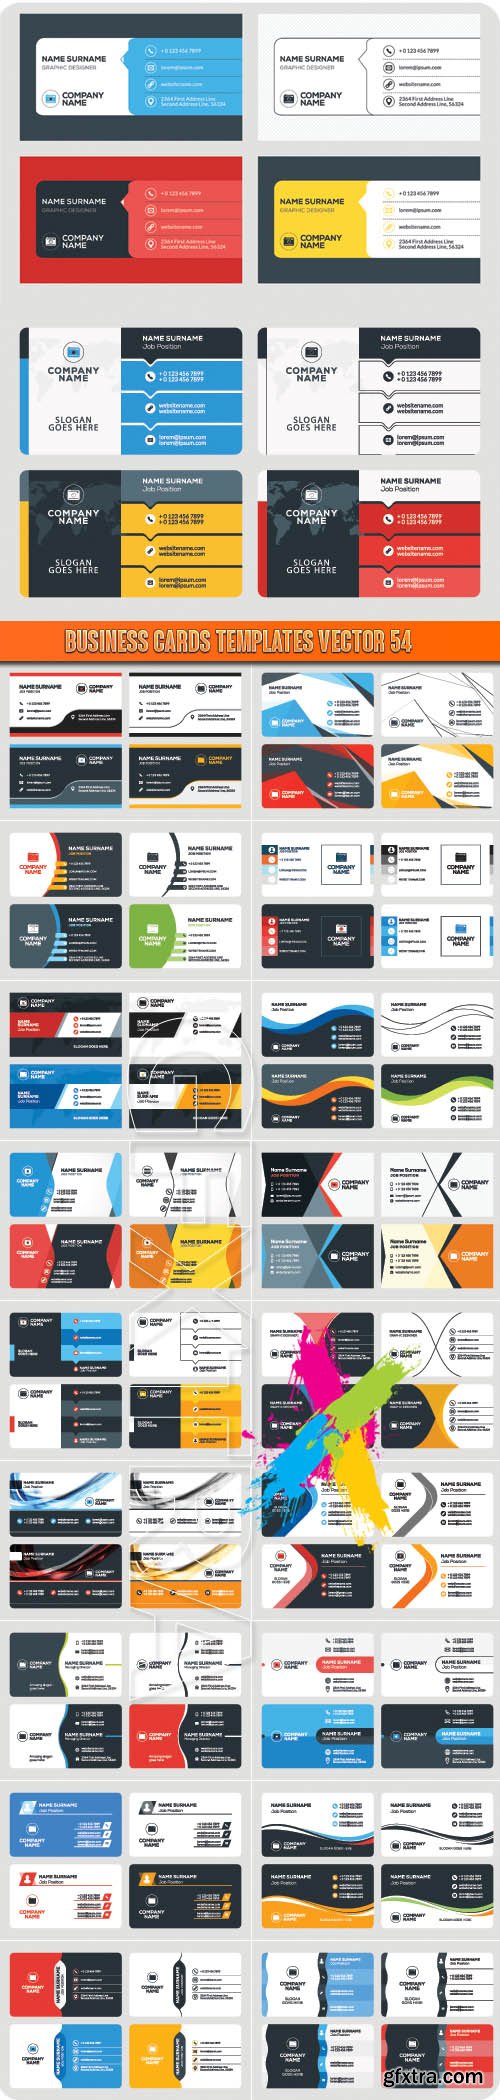 Business Cards Templates vector 54